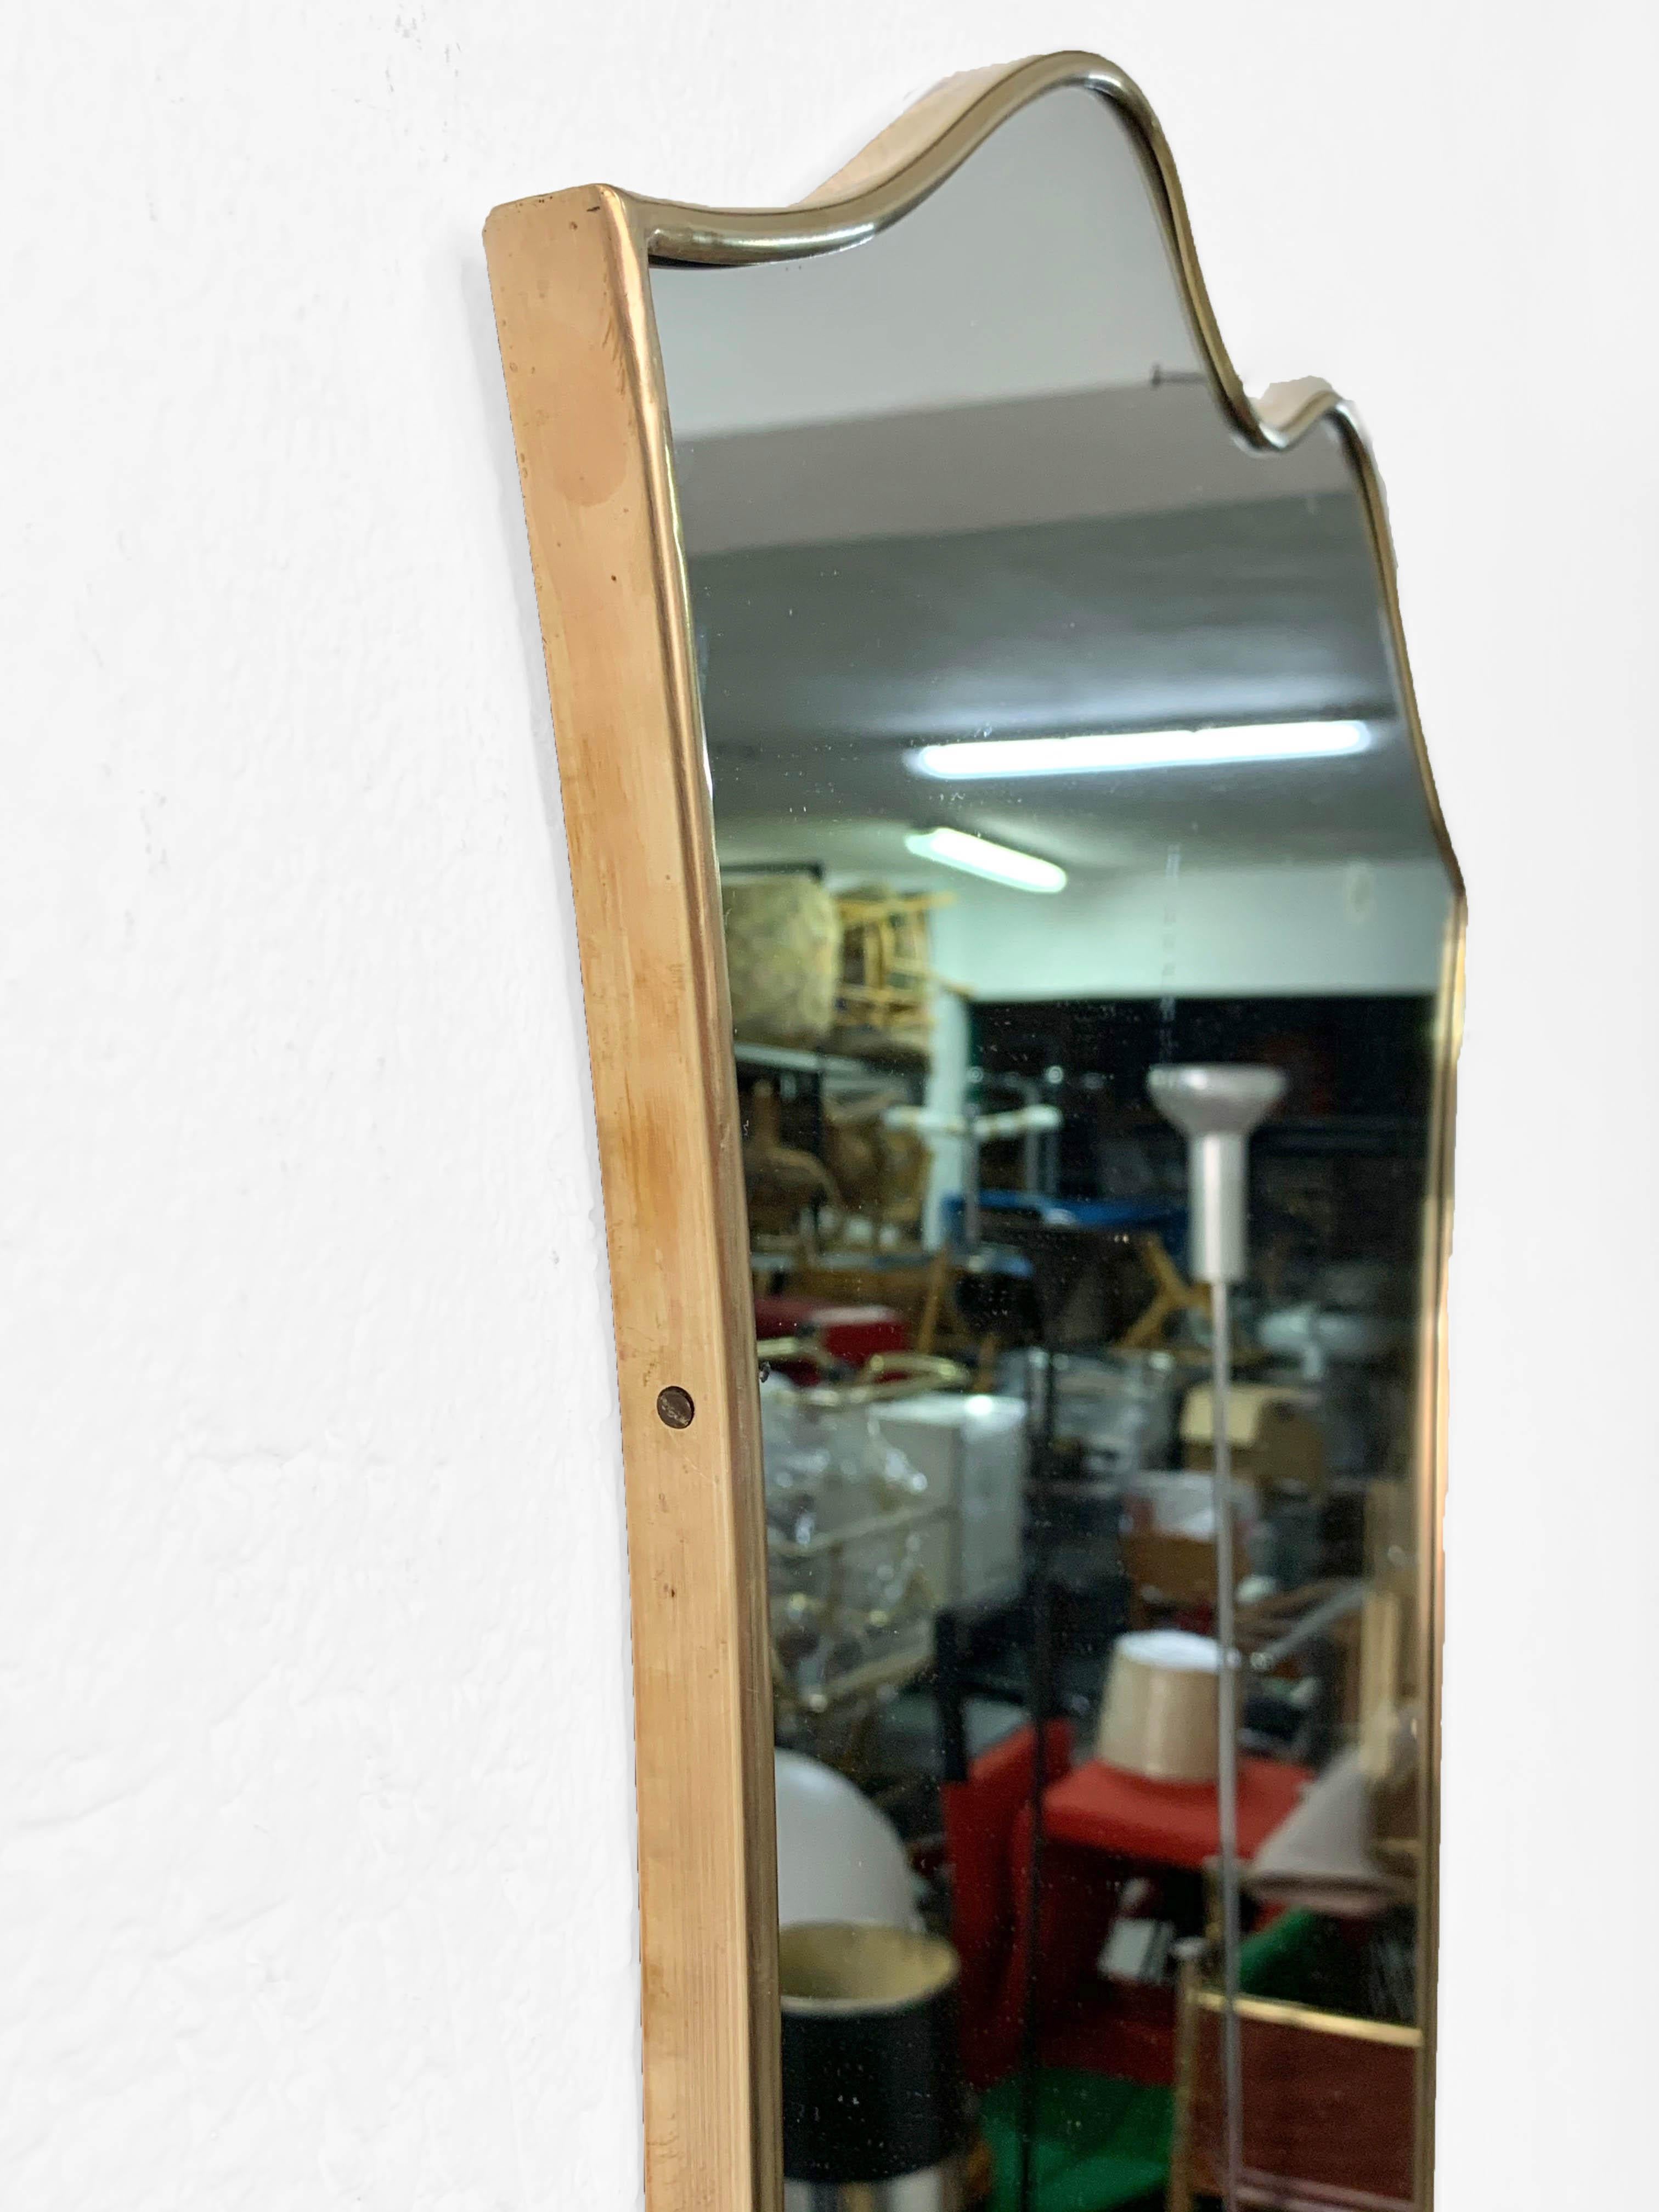 Amazing midcentury mirror attributed to Gio Ponti. This iconic piece has a shield-shape and a very elegant and light brass frame. 

The item has an original sticker, dated 10th February 1961 and indicating the producer, the famous 